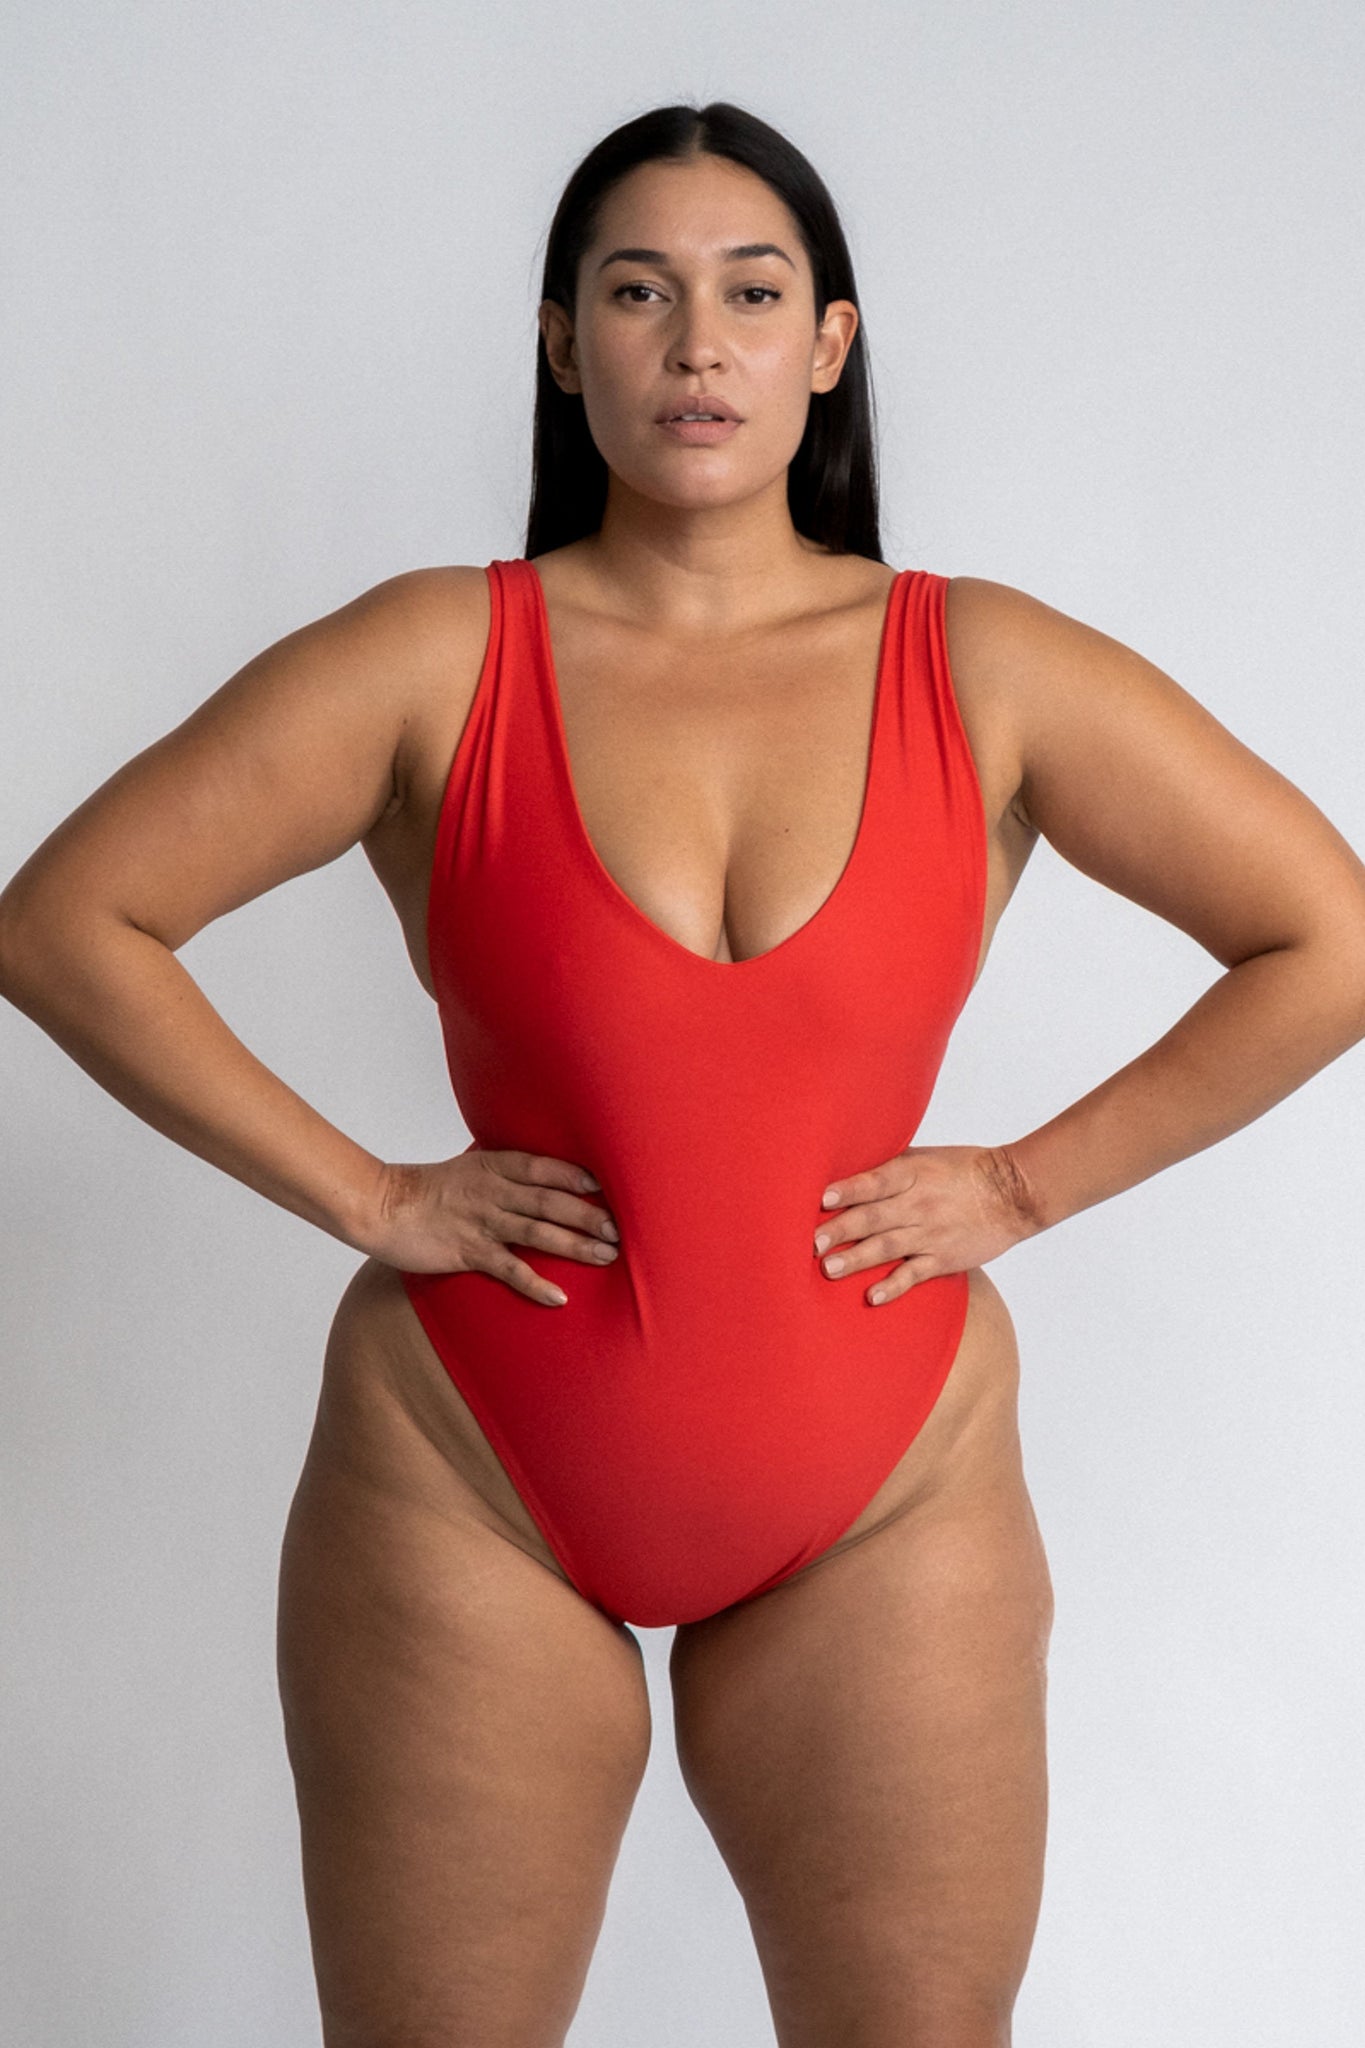 A woman standing in front of a white wall with her hands on her hips wearing a bright red one piece swimsuit with a v neckline and minimal coverage.